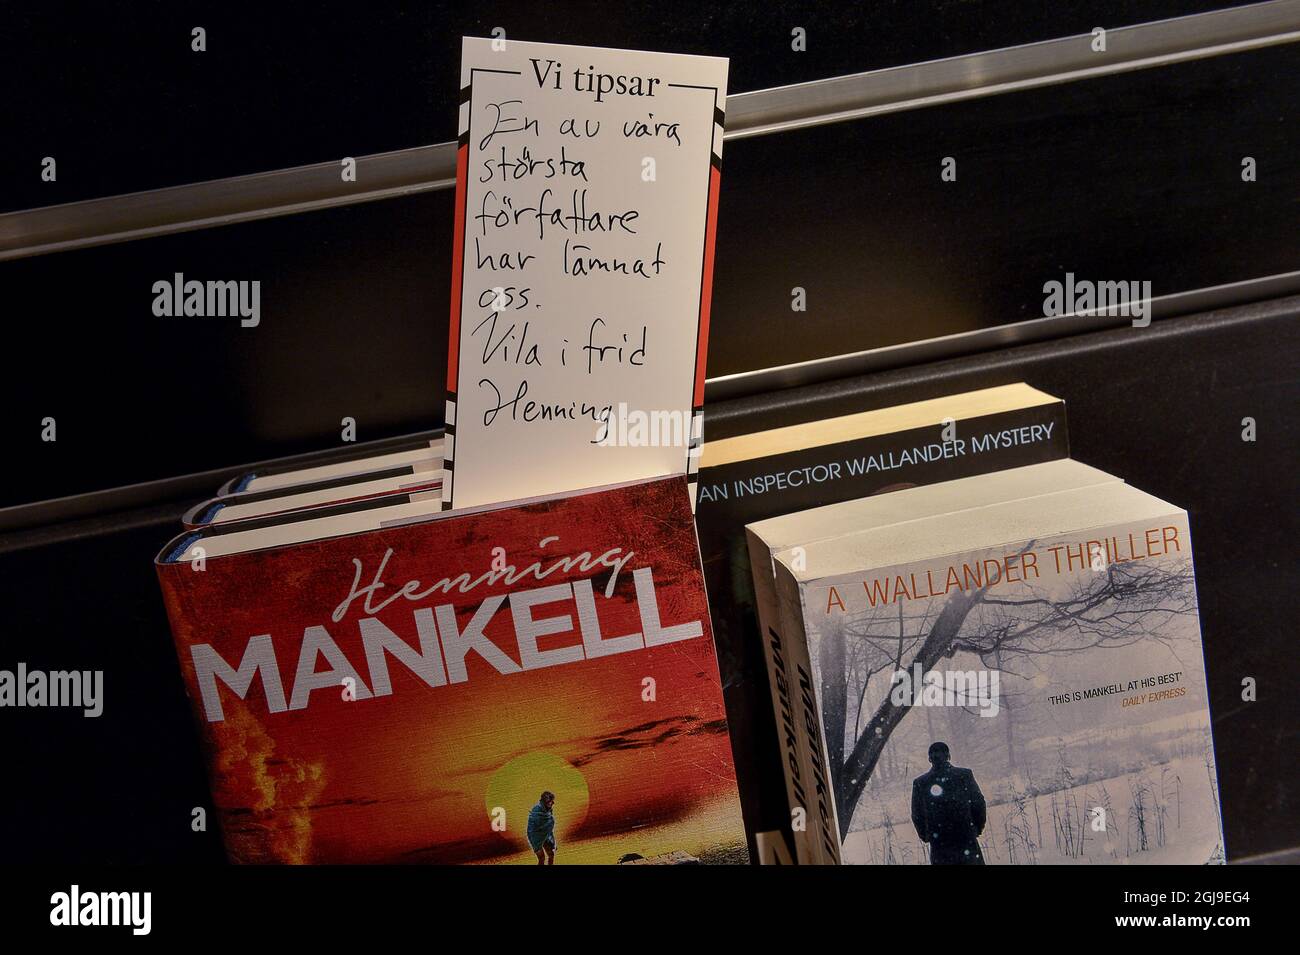 STOCKHOLM 2015-10-05 A note saying 'Rest in peace, one of our greatest writers' on a book of Henning Mankells on a shelf in a book store in Stockholm, Sweden, October 5, 2015. Henning Mankell died Monday. Henning Mankell was a Swedish crime writer, political activist and dramatist, best known for a series of crime novels starring his most famous creation, Inspector Kurt Wallander. Wallander has been filmed both with Swedish actor Krister Henriksson and British actor Kenneth Branagh in the leading roles. Mankell was 67. Foto Jonas Ekstromer / TT / kod 10030  Stock Photo